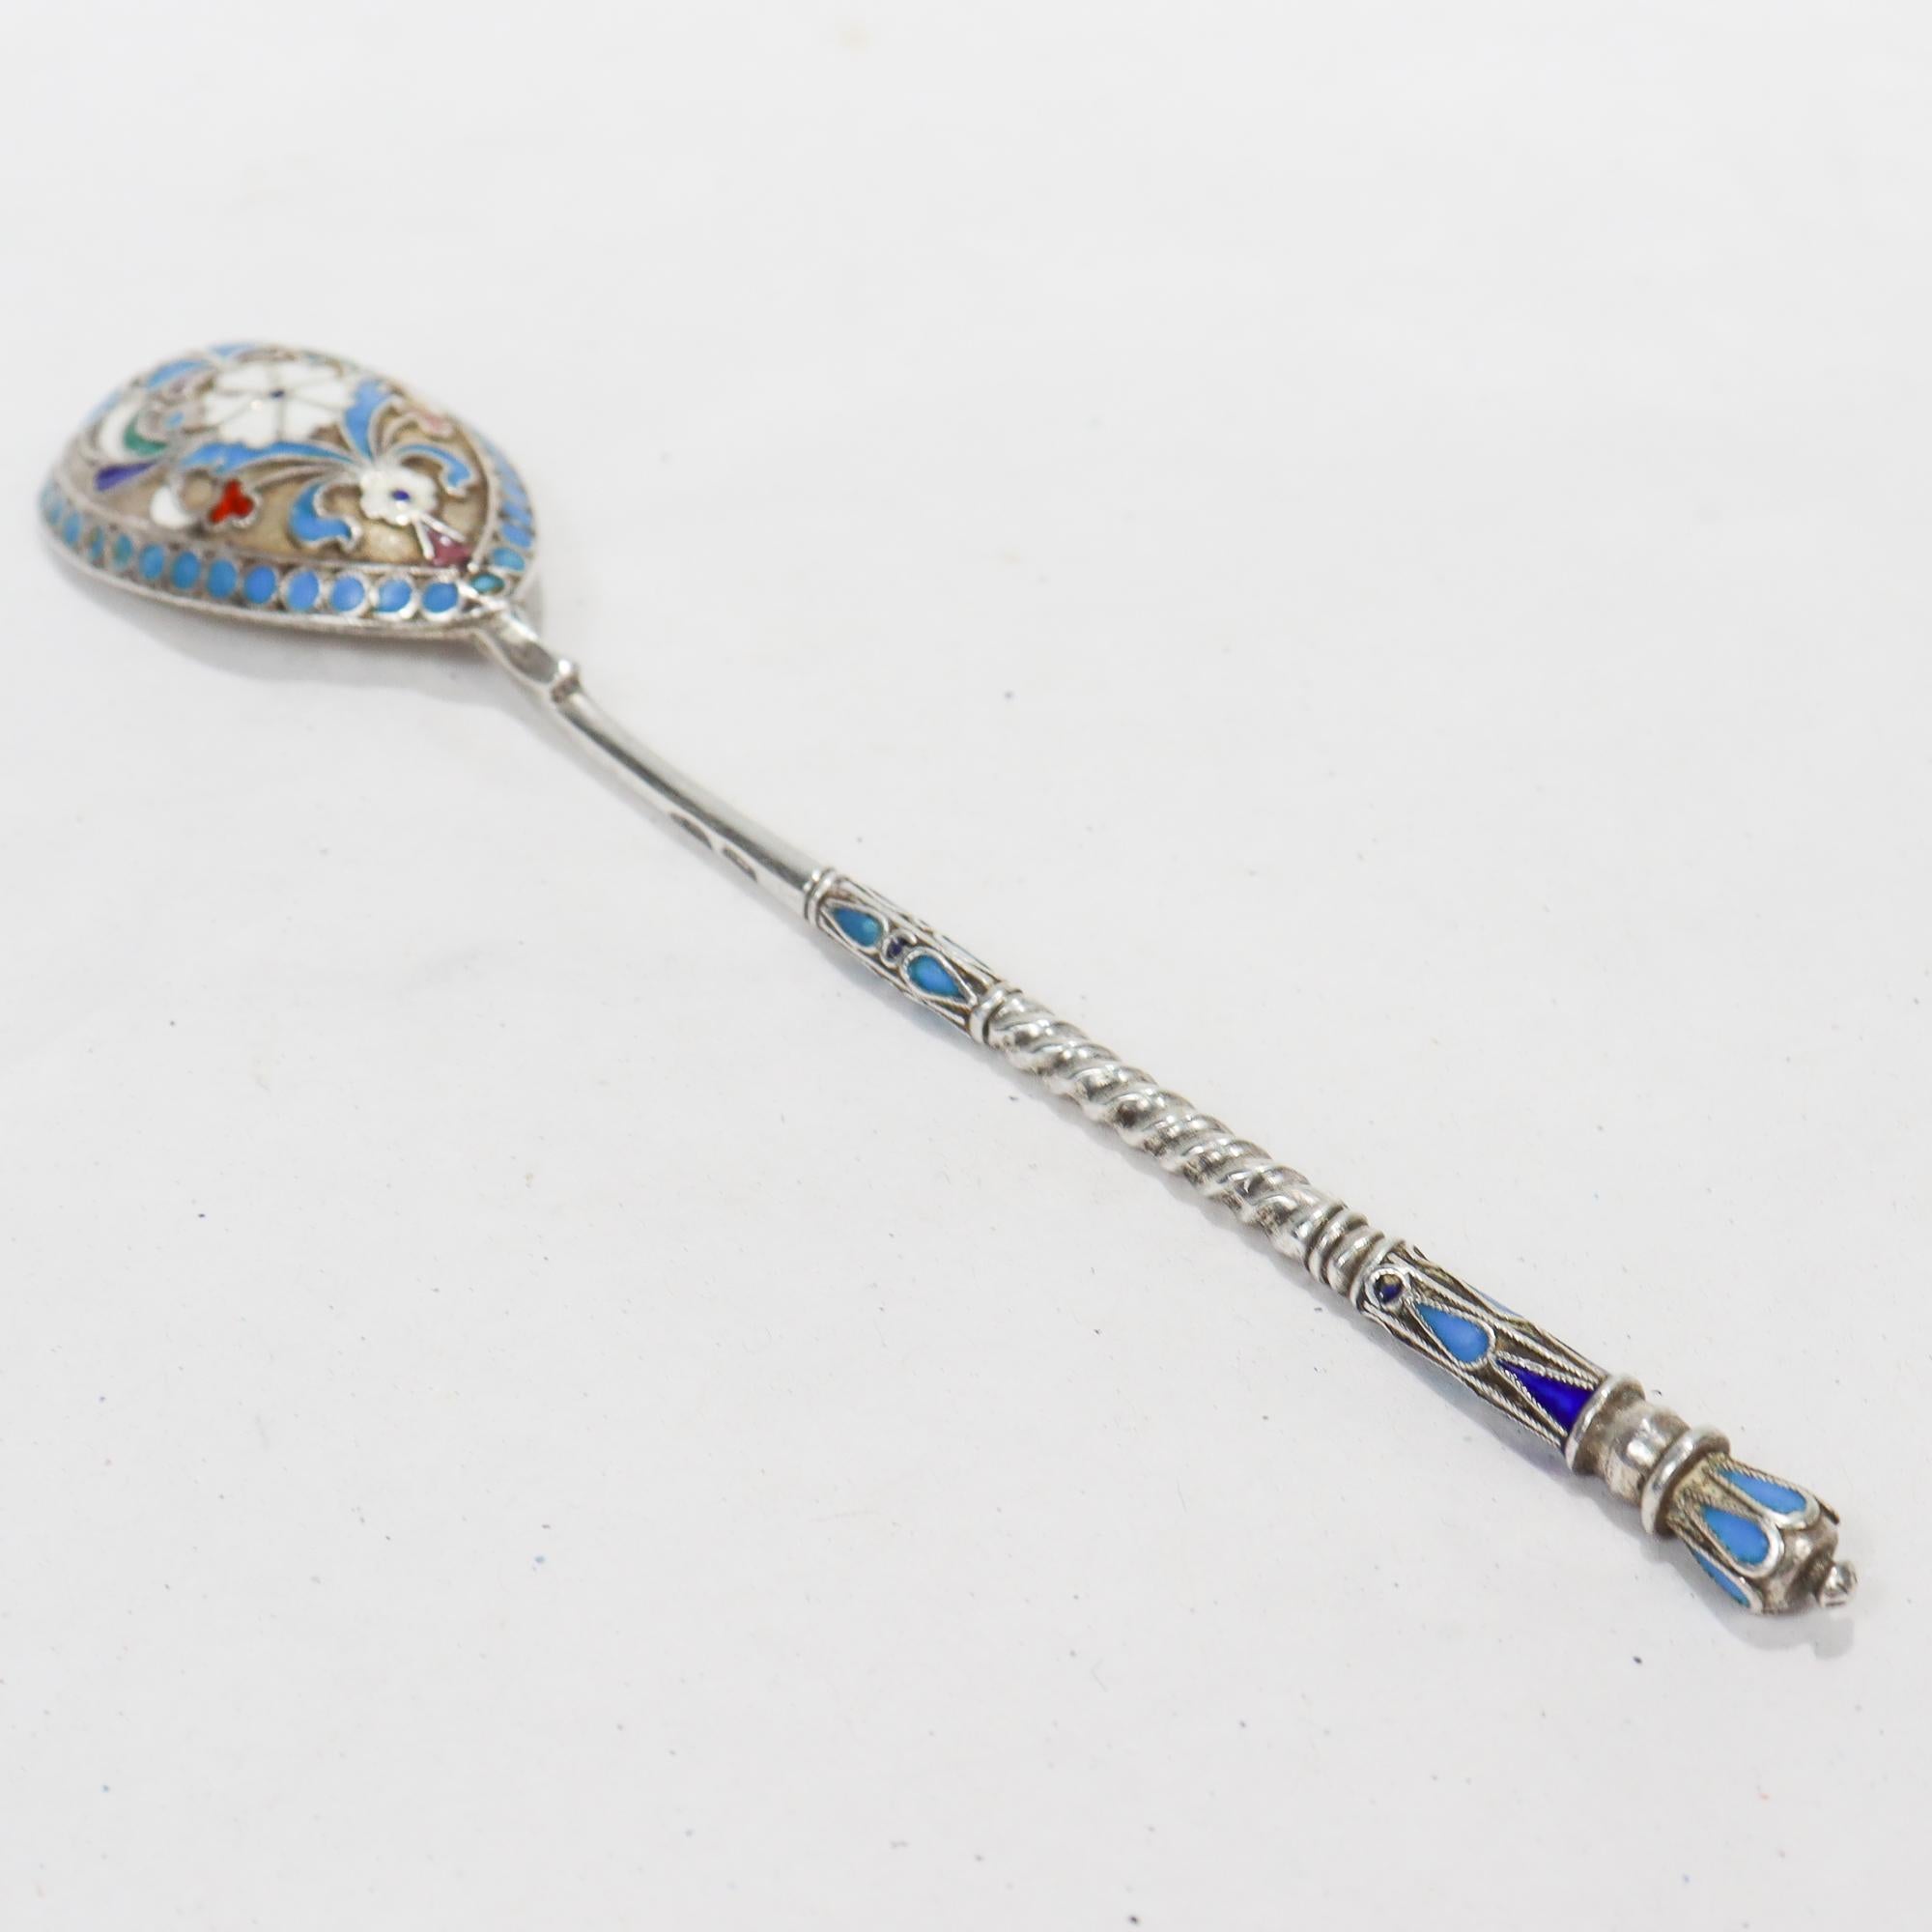 Antique Imperial Russian Silver & Cloisonne Enamel Spoon In Good Condition For Sale In Philadelphia, PA